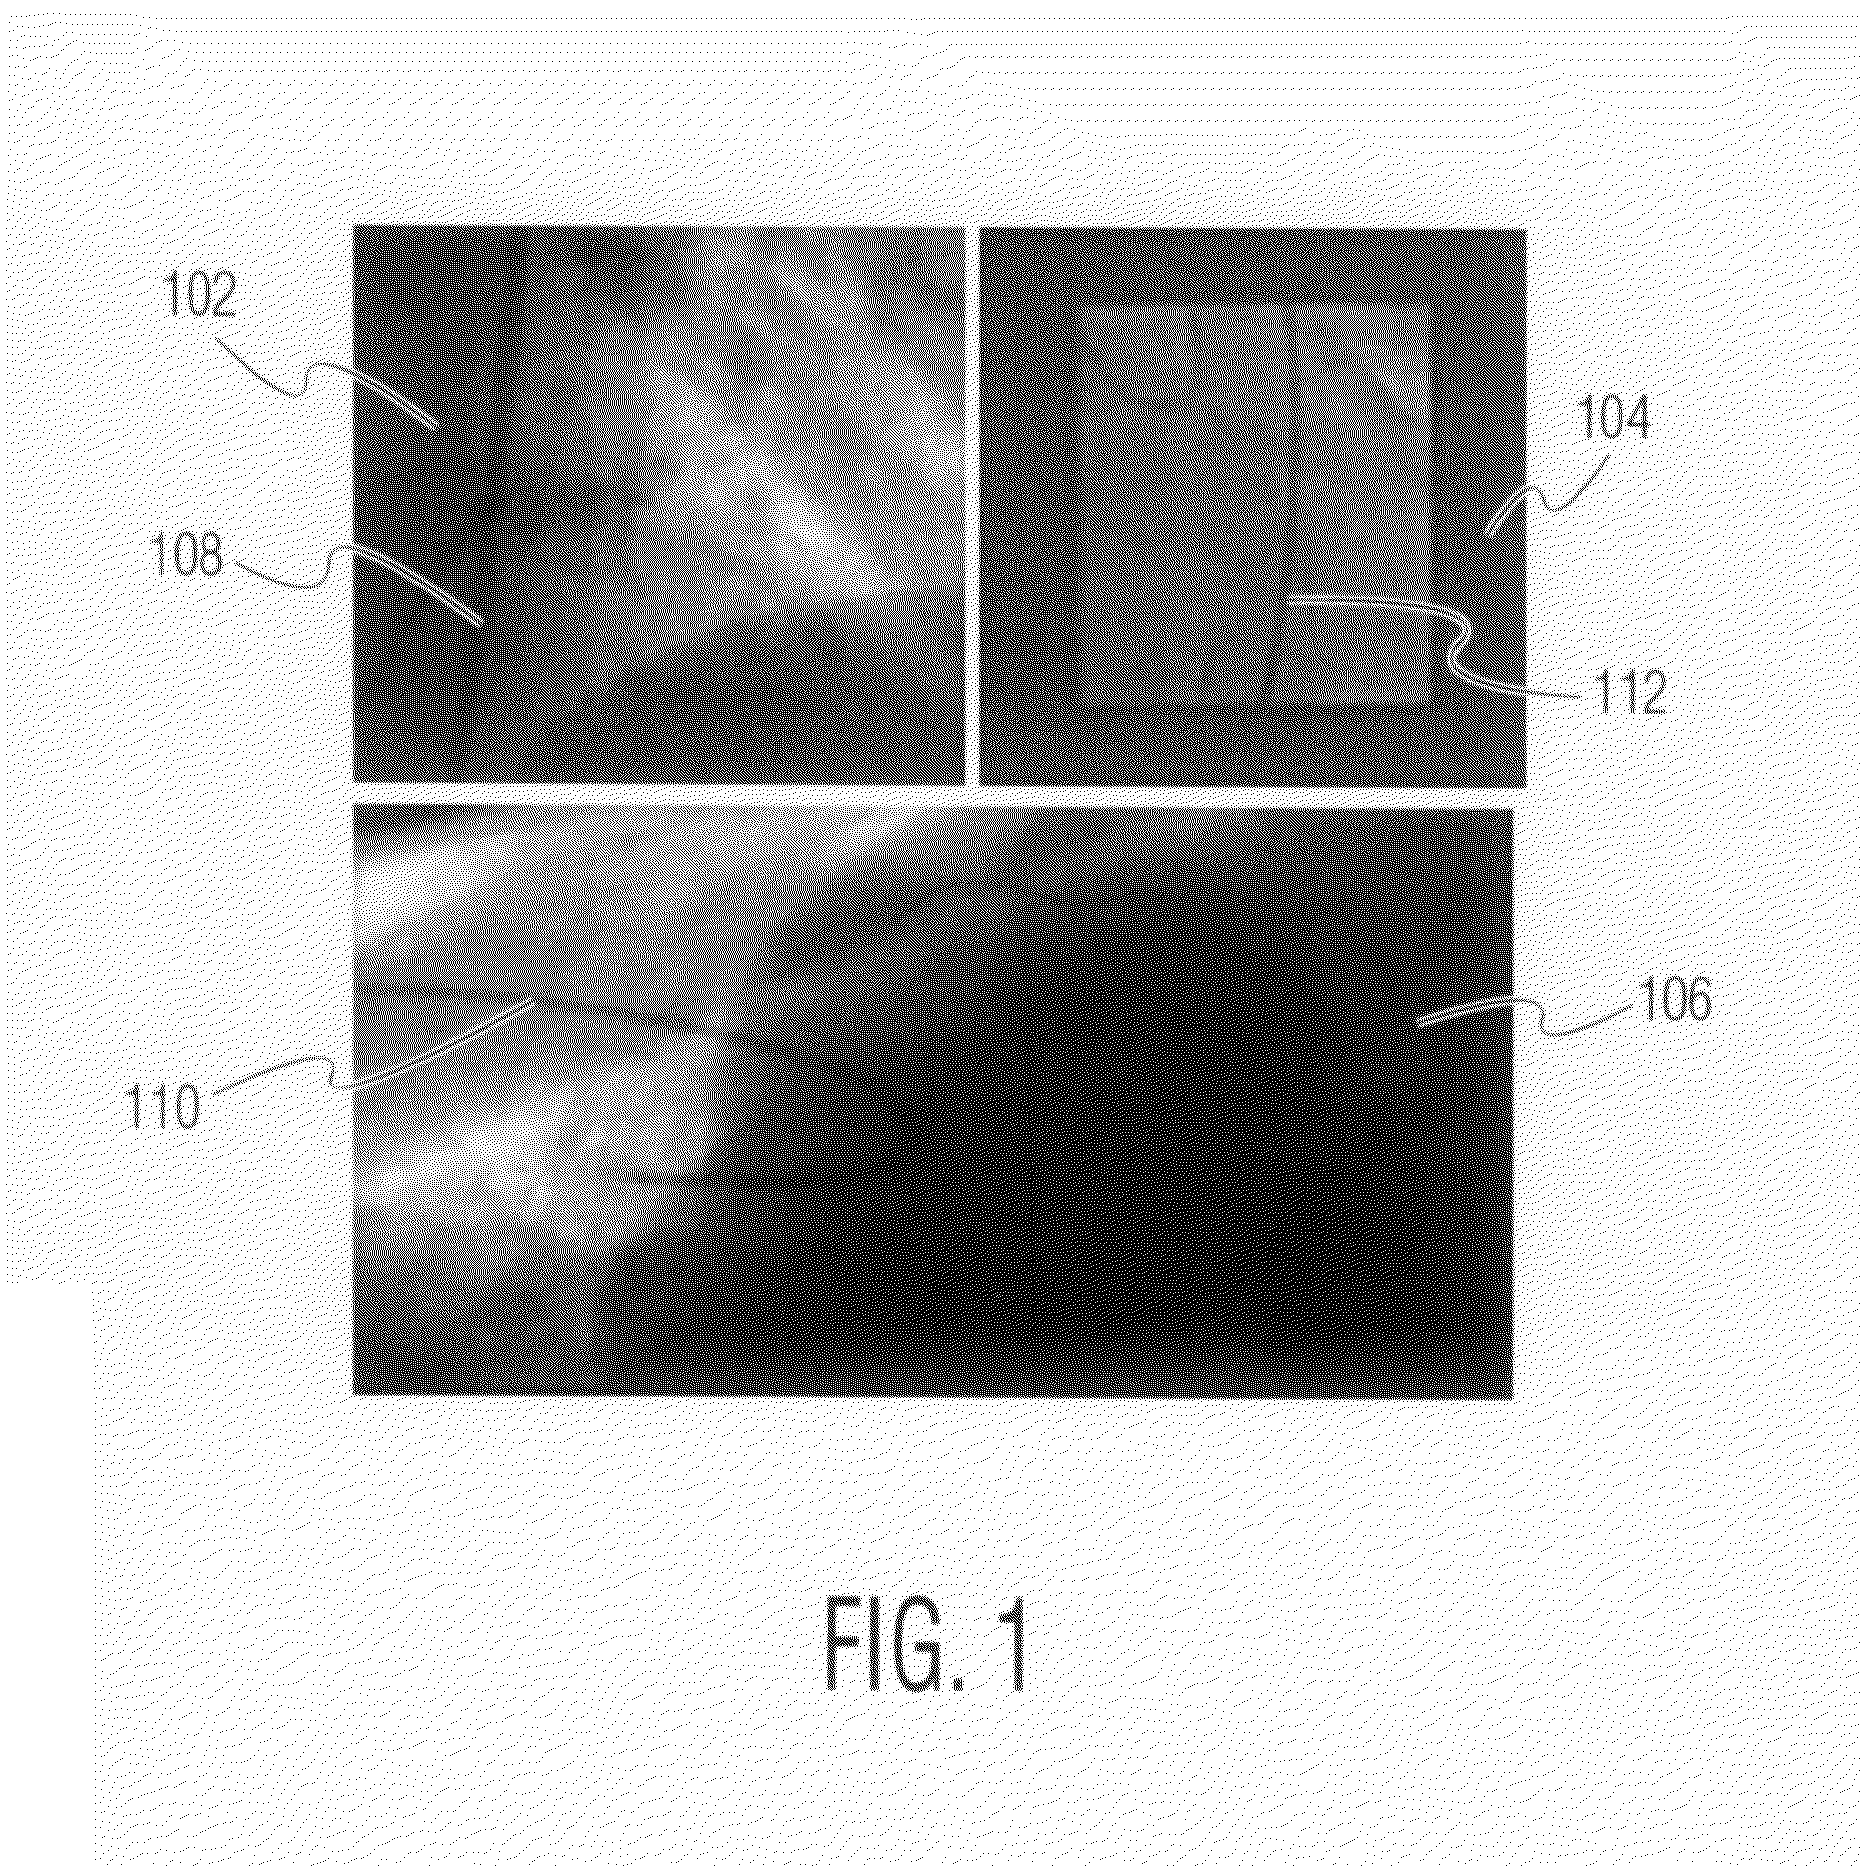 System and method for detecting and tracking a guidewire in a fluoroscopic image sequence